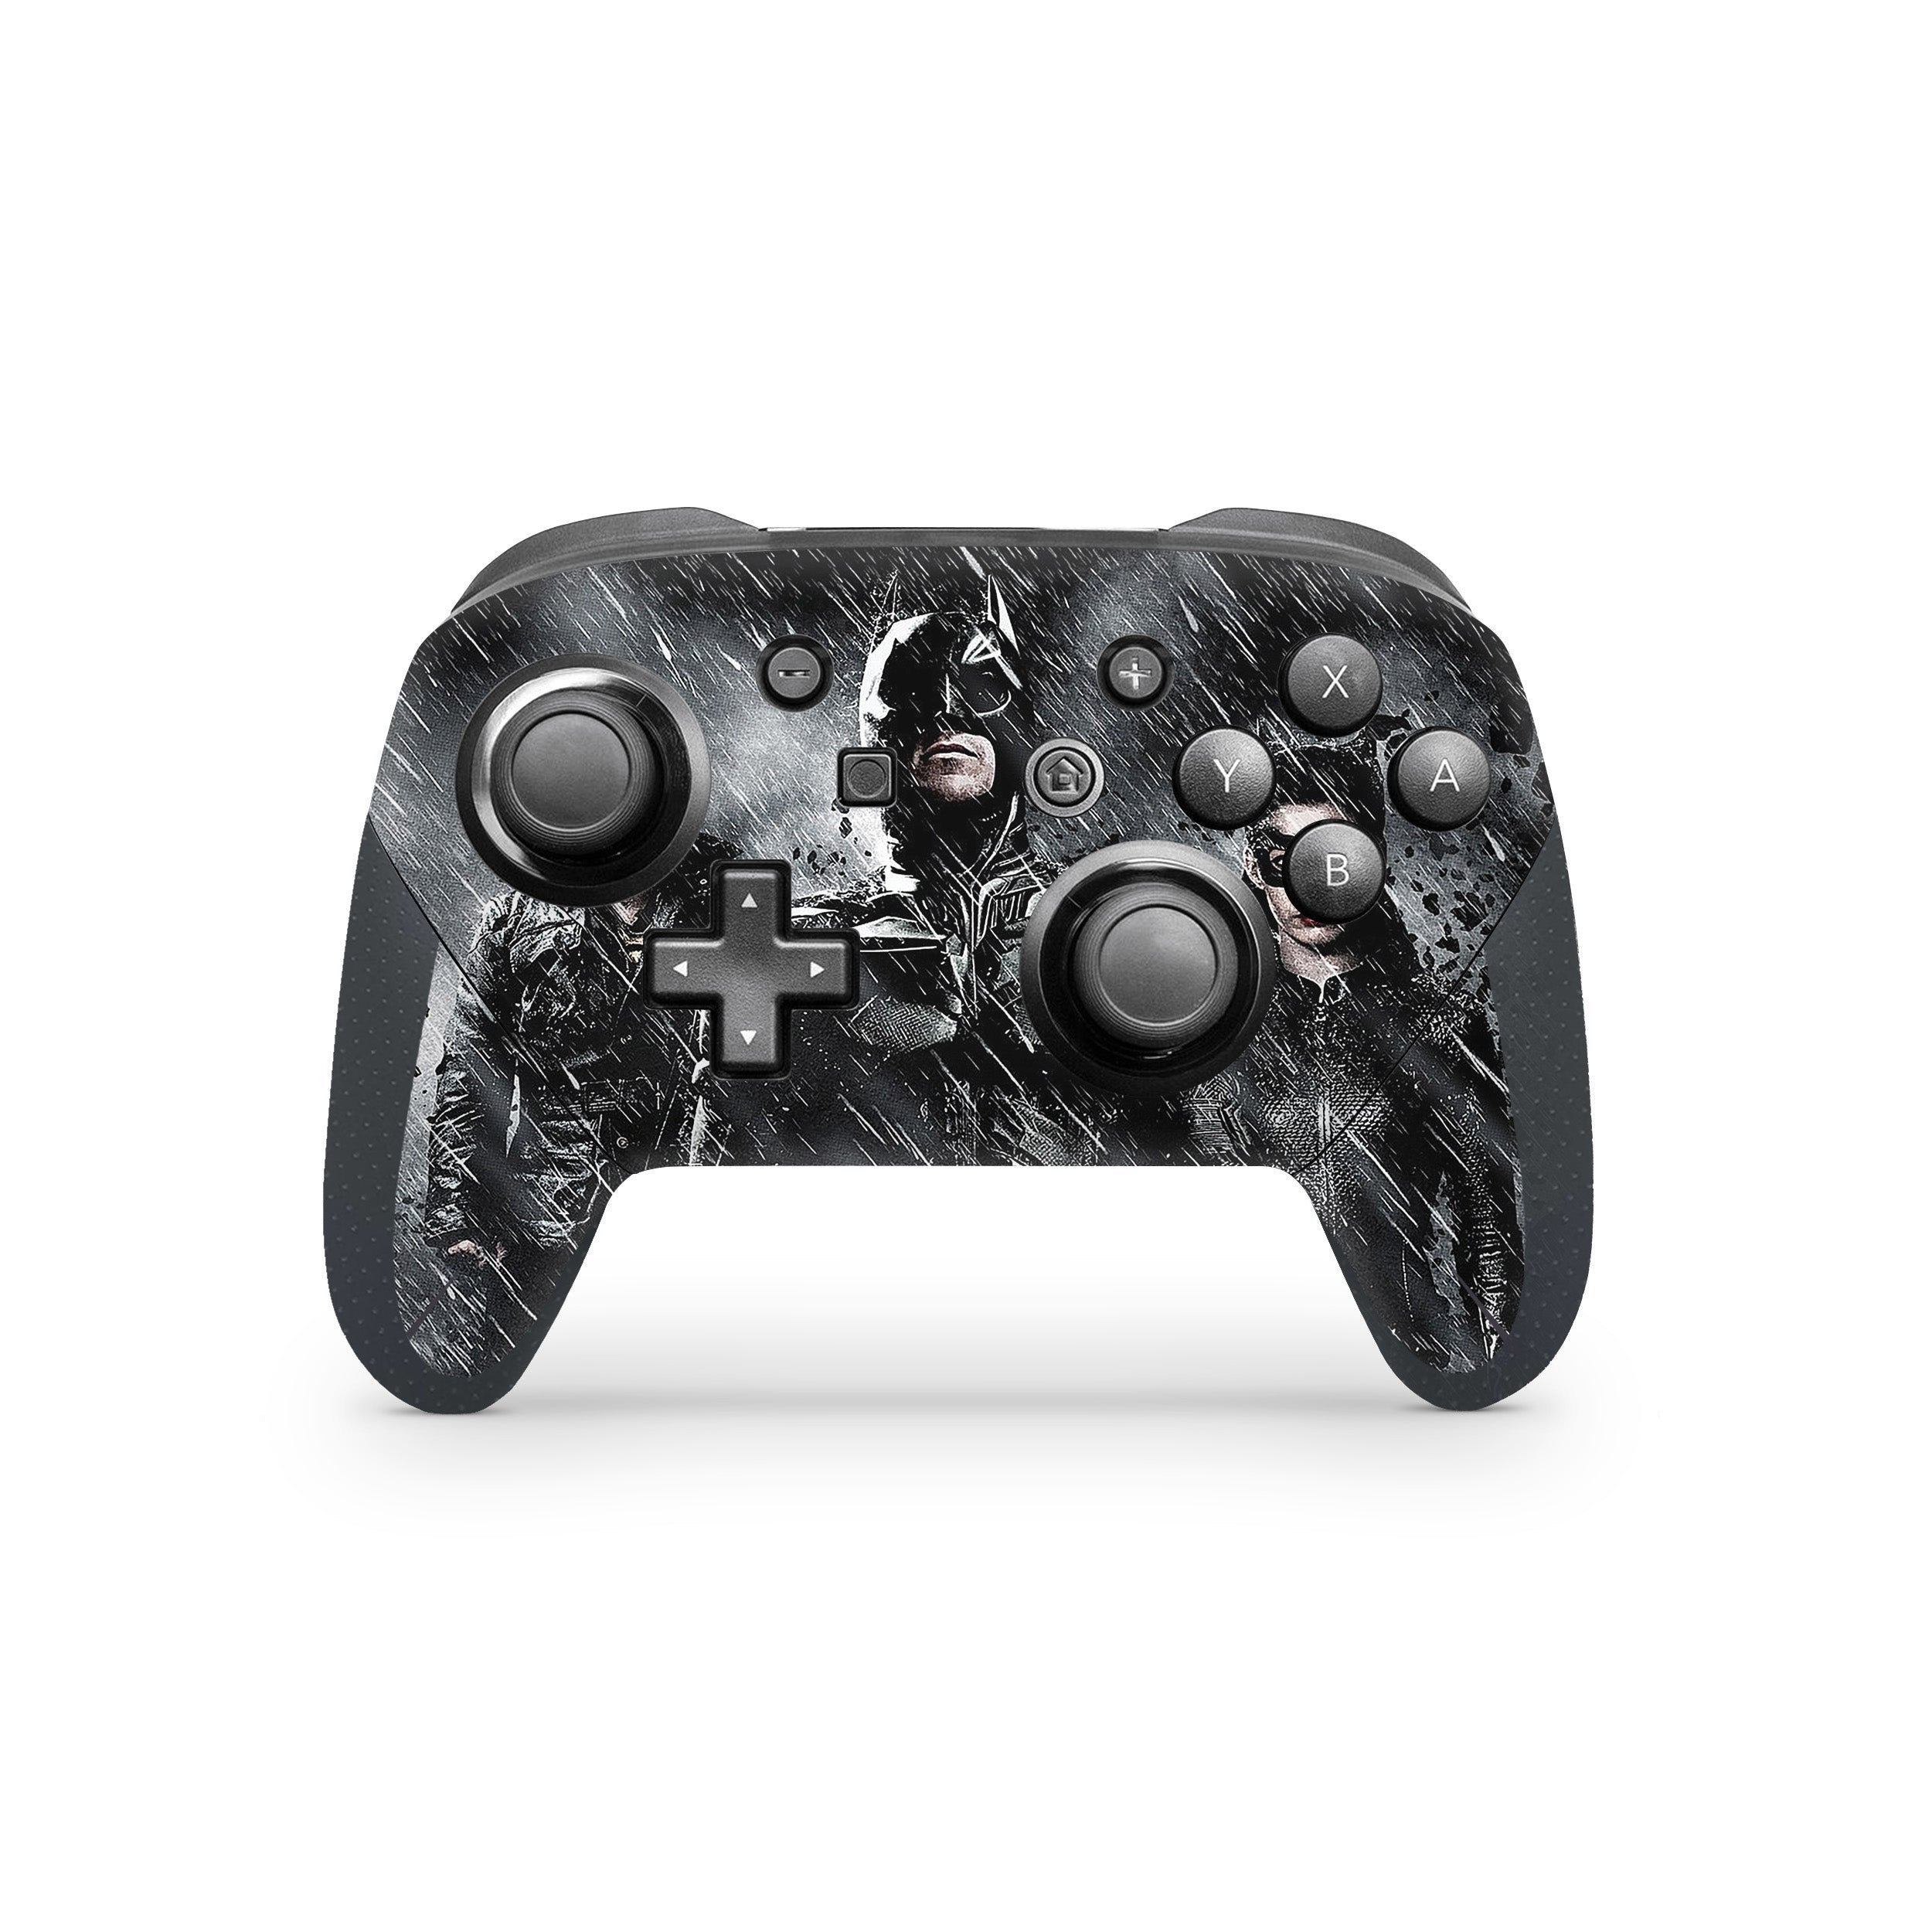 A video game skin featuring a DC Batman design for the Switch Pro Controller.